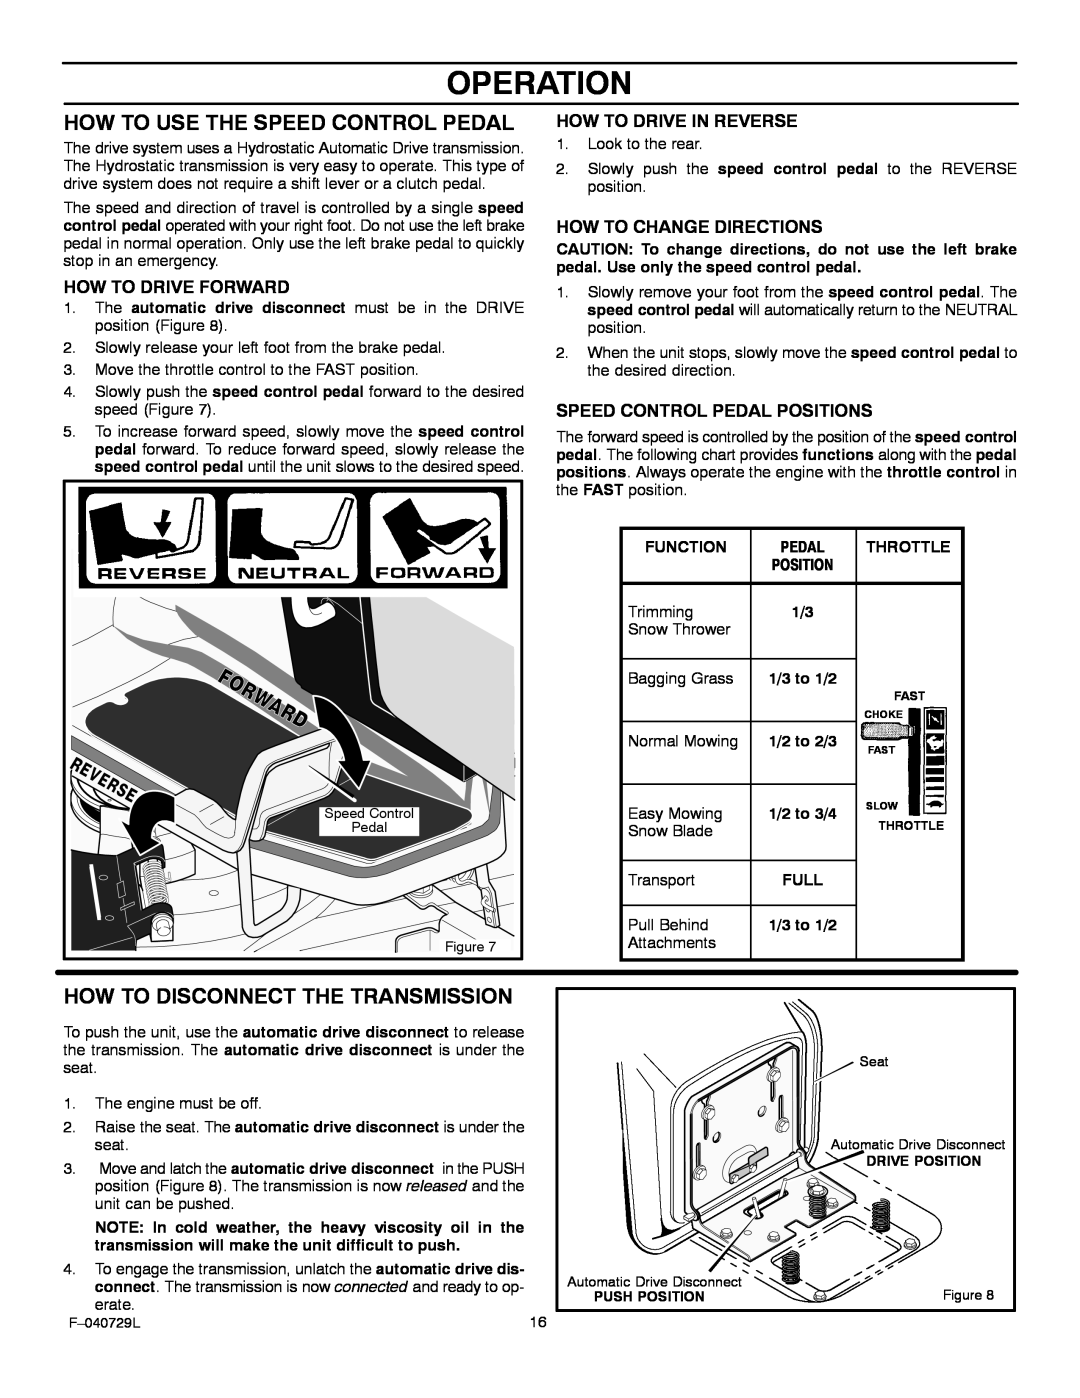 Murray 425620x92A Operation, How To Use The Speed Control Pedal, How To Disconnect The Transmission, How To Drive Forward 